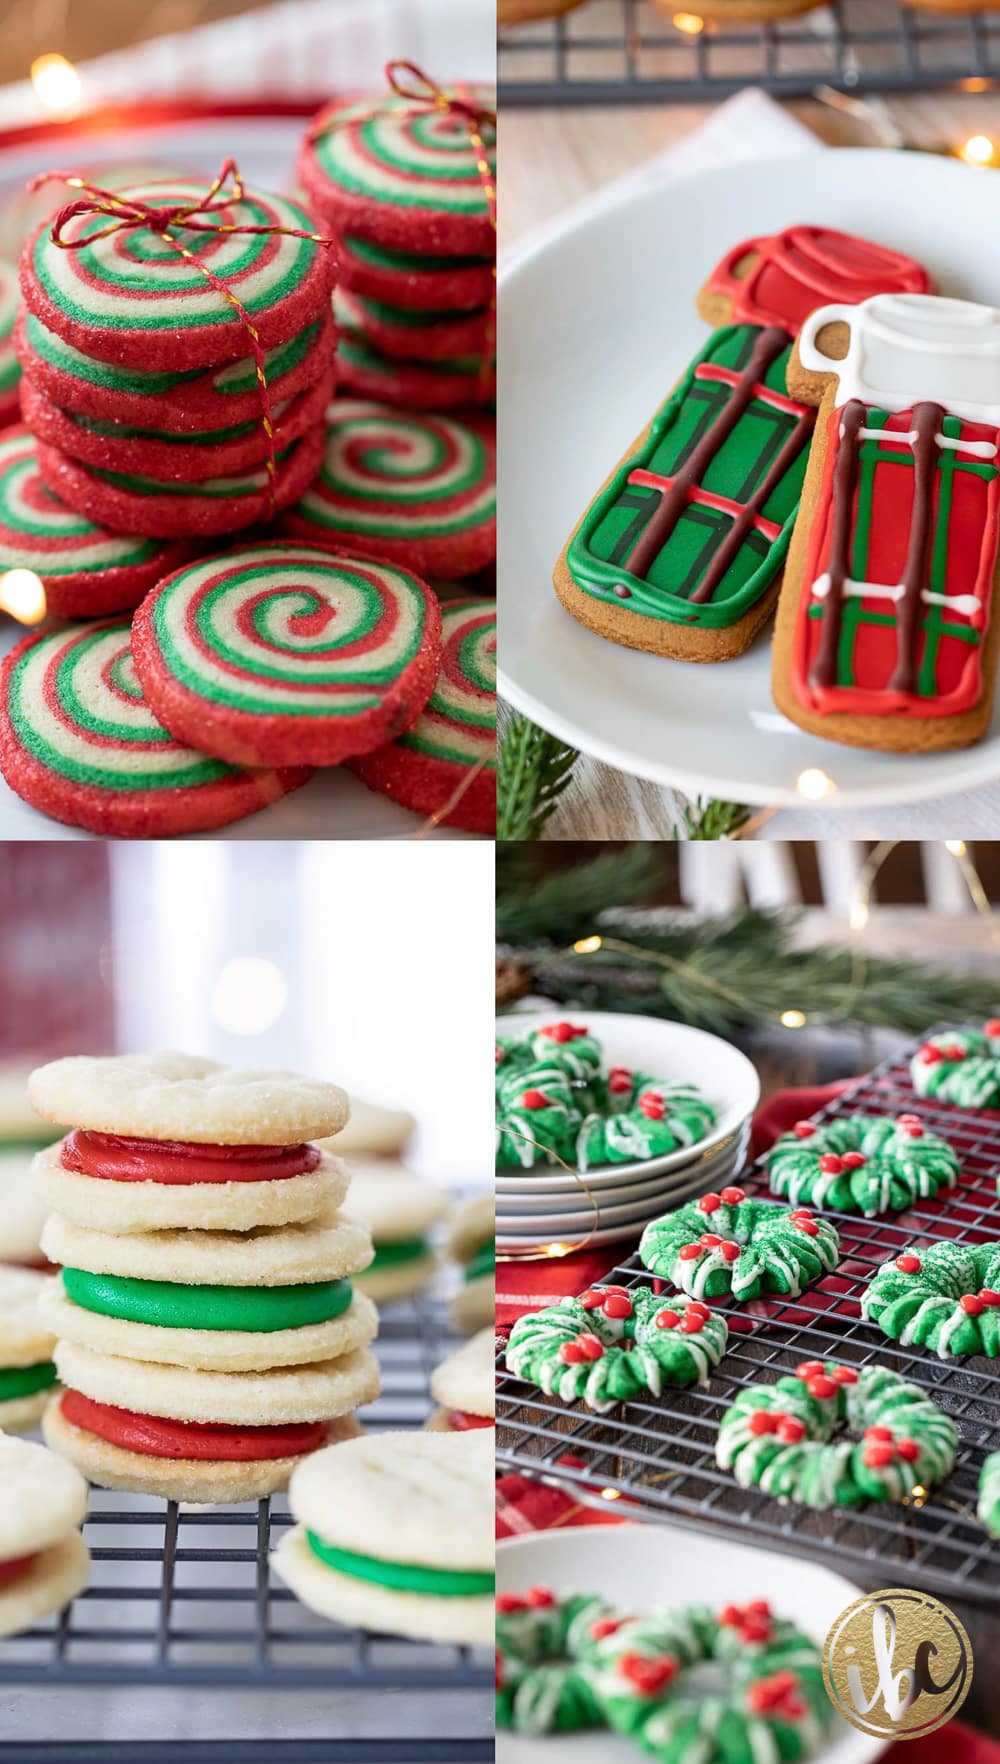 https://inspiredbycharm.com/wp-content/uploads/2023/11/Inspired-by-Charm-Christmas-Cookie-REcipes.jpg